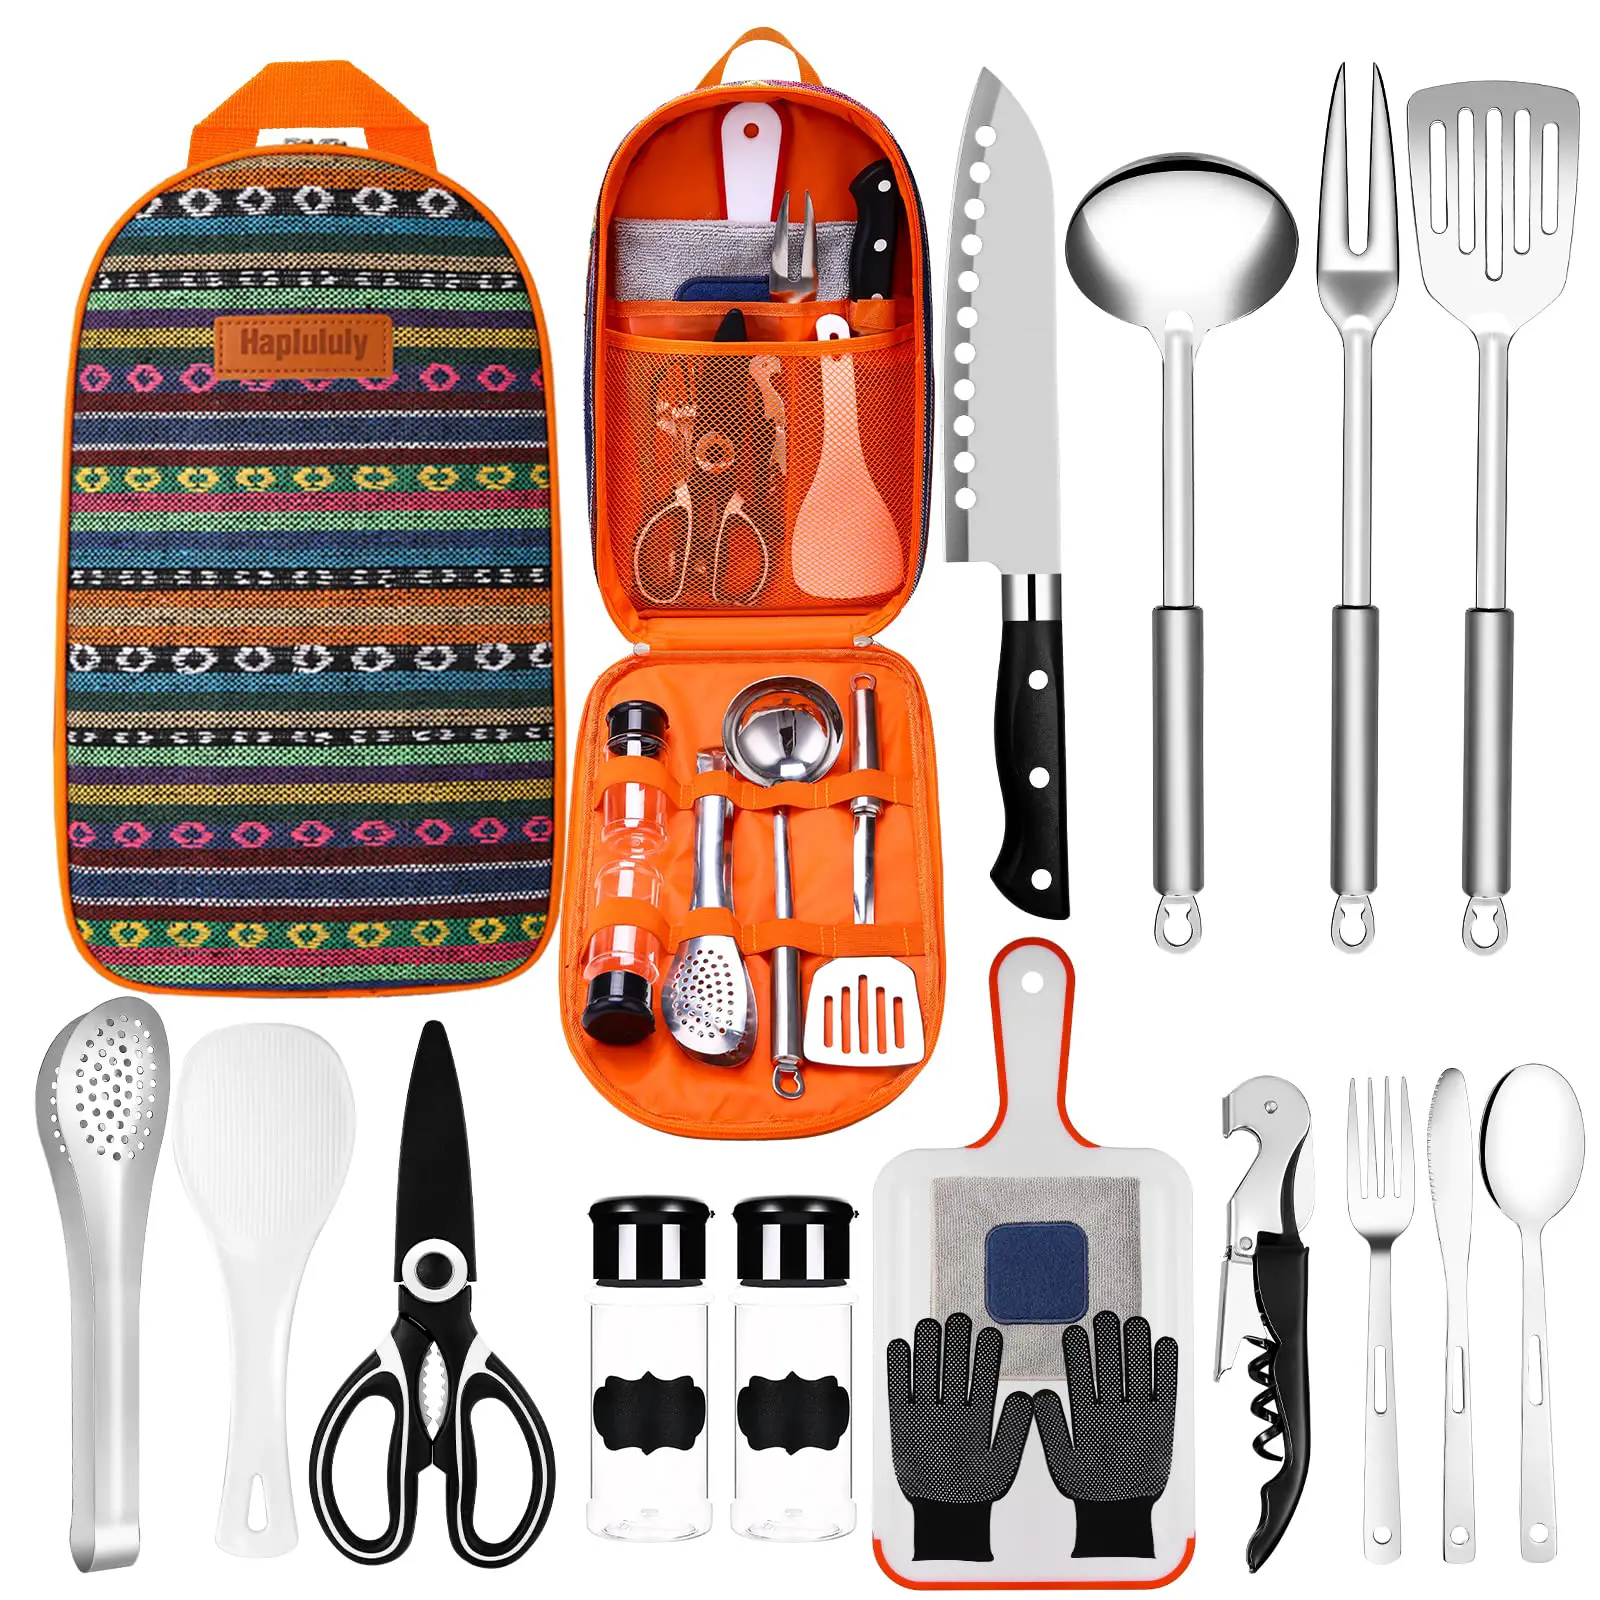 Haplululy Camping Essentials Camping Accessories Gear Must Haves Camper Tent Camping Kitchen Rv Cooking Set Camping Cooking Utensils Set Supplies Gadgets Outdoor Stove Portable Picnic Gifts BBQ Stuff 1-National style